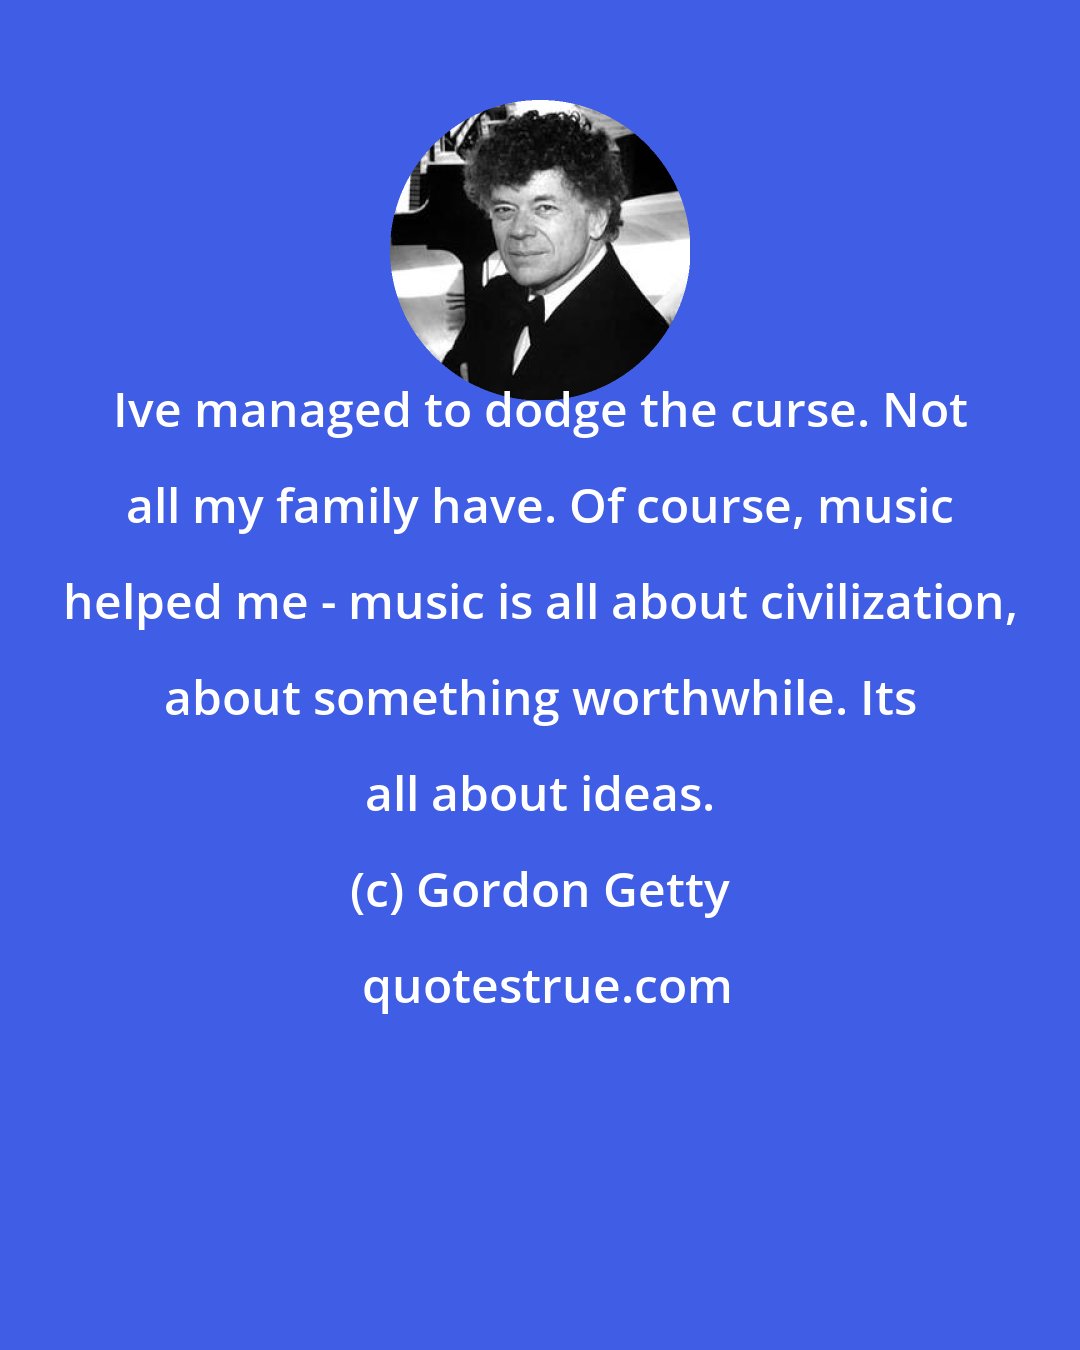 Gordon Getty: Ive managed to dodge the curse. Not all my family have. Of course, music helped me - music is all about civilization, about something worthwhile. Its all about ideas.